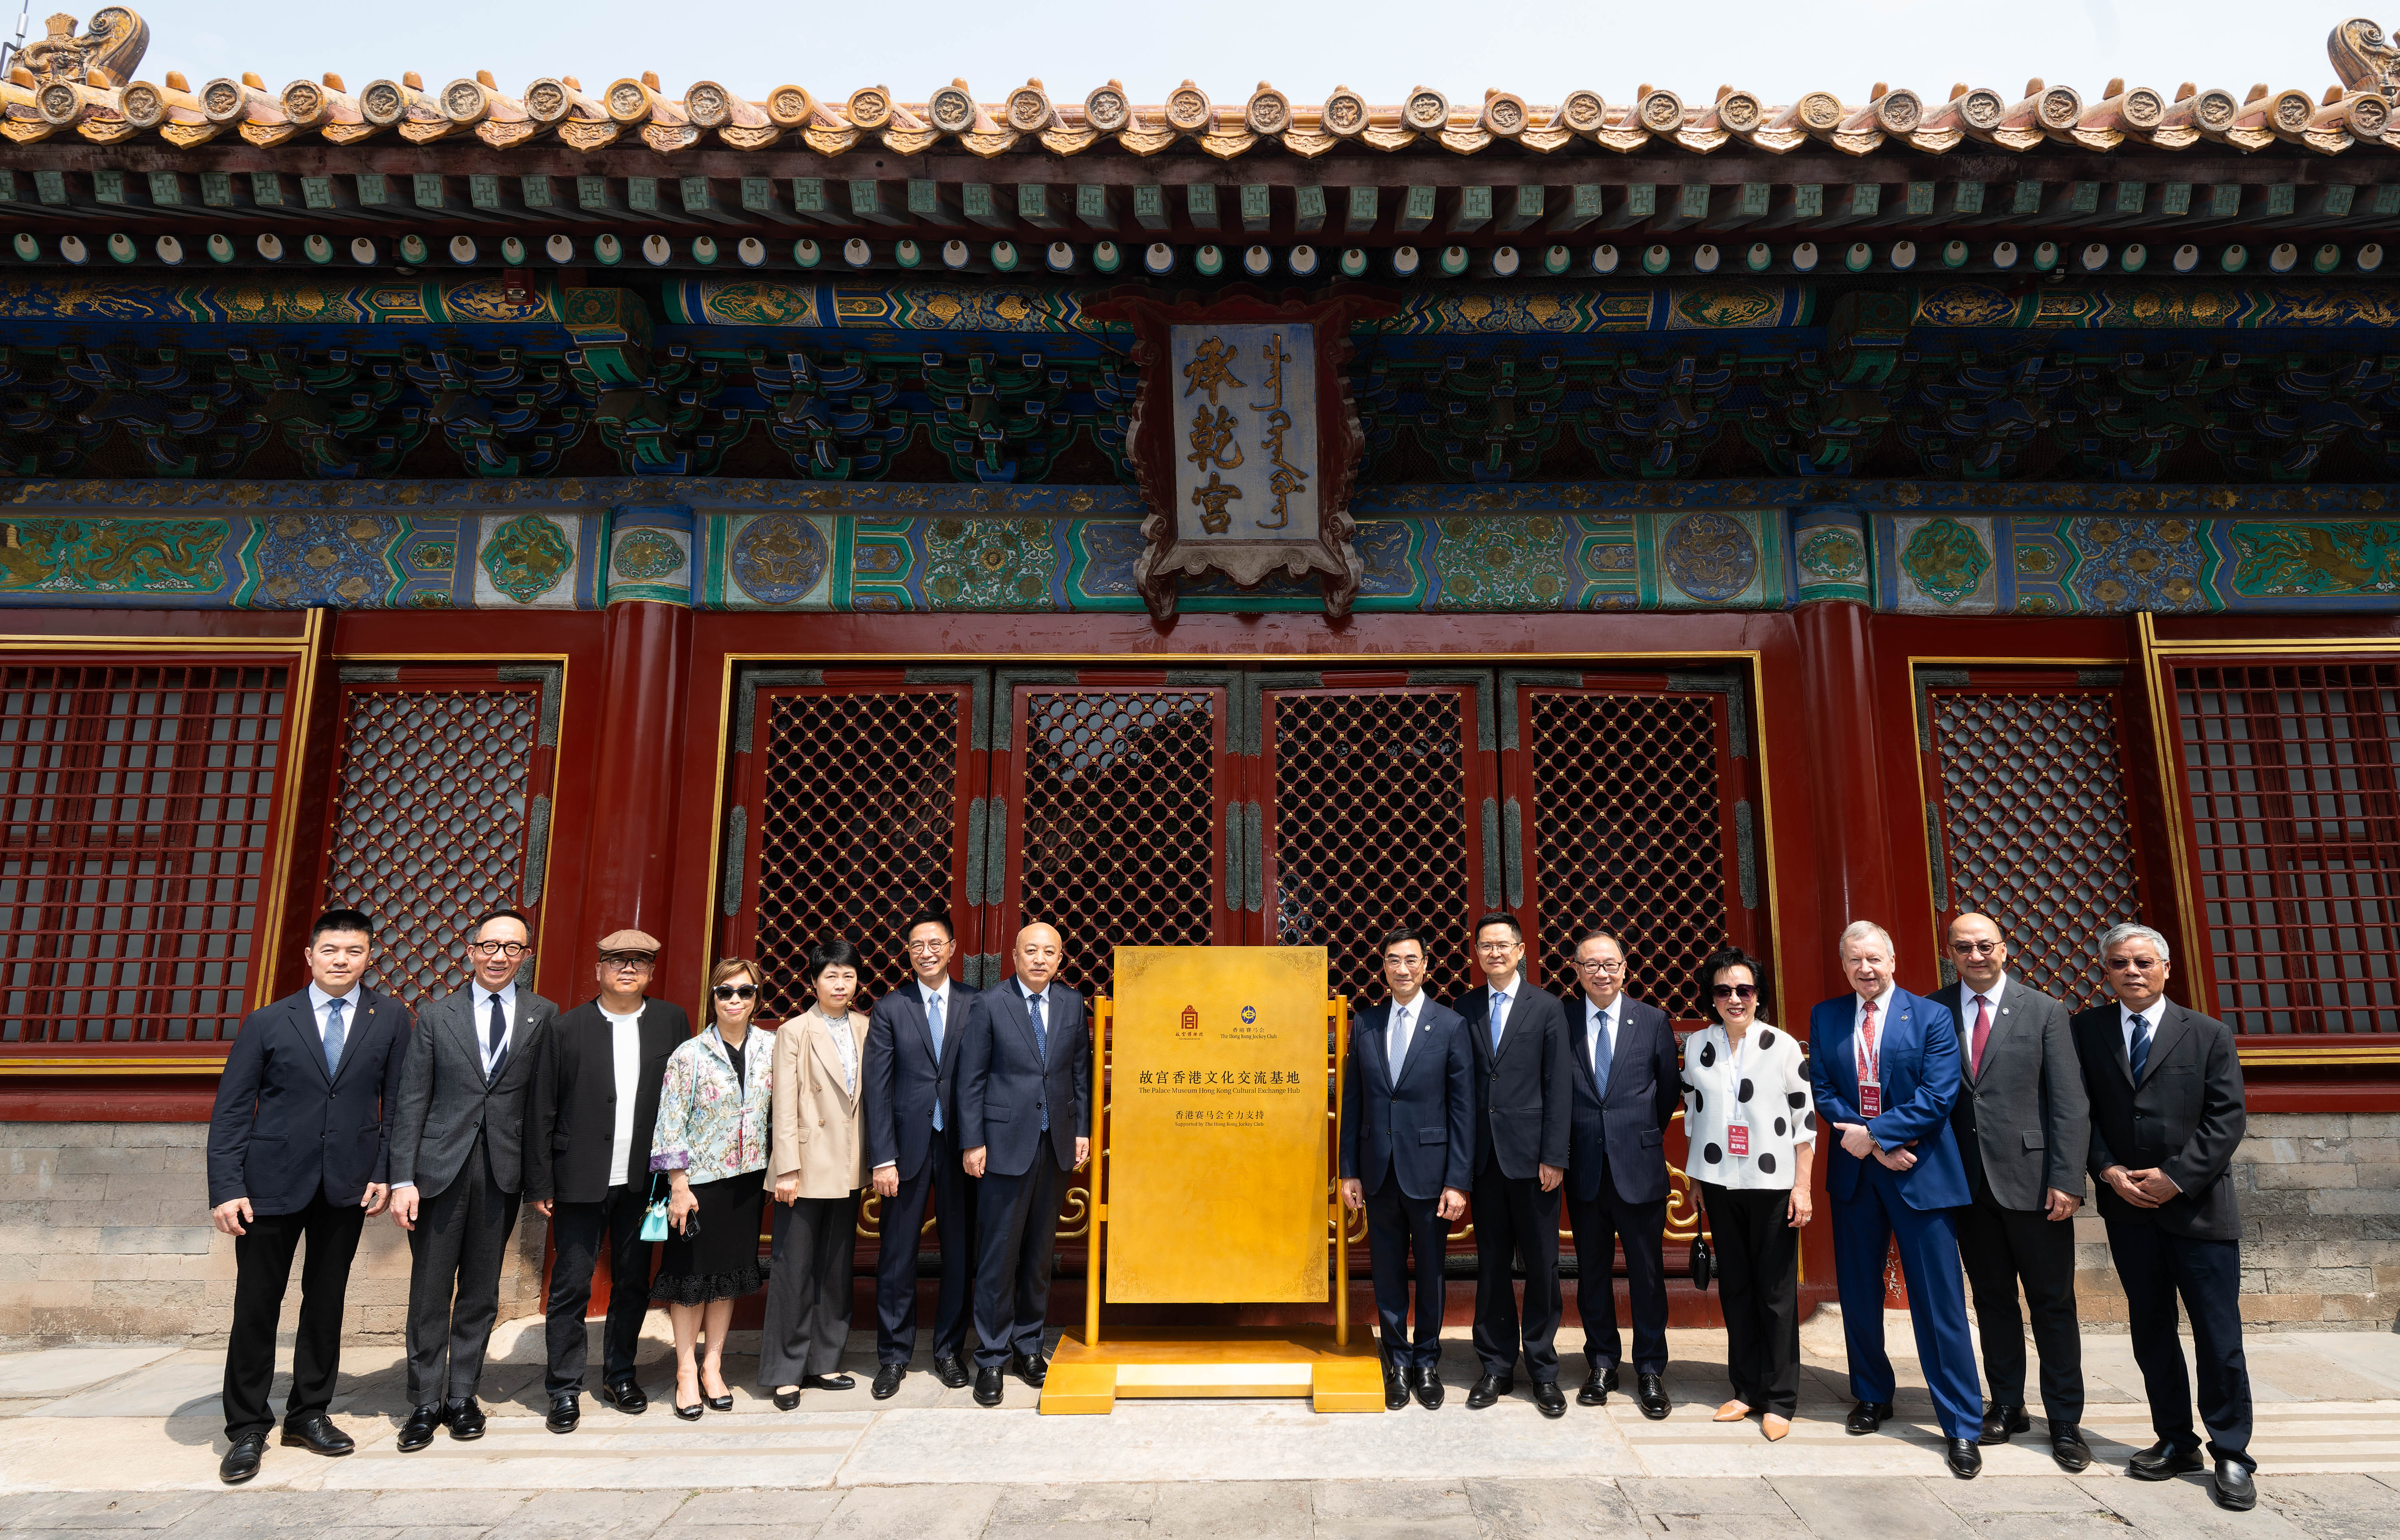 Kevin Yeung, Secretary for Culture, Sports and Tourism of the HKSAR Government (6th left); Xu Li, Level II Bureau Rank Official of the Hong Kong and Macau Work Office of the CPC Central Committee (5th left); Kong Lun, Deputy Director-General of the Department of Hong Kong, Macao and Taiwan Affairs of the Ministry of Culture and Tourism (6th right); Dr Wang Xudong, Member, Party Leadership Group of the Ministry of Culture and Tourism and Director of the Palace Museum (7th left); Club Chairman Michael Lee (7th right); Club Deputy Chairman Martin Liao (5th right) and the five Board of Directors of the Institute of Philanthropy and other guests beside the plaque of The Palace Museum Hong Kong Cultural Exchange Hub at the Palace Museum.